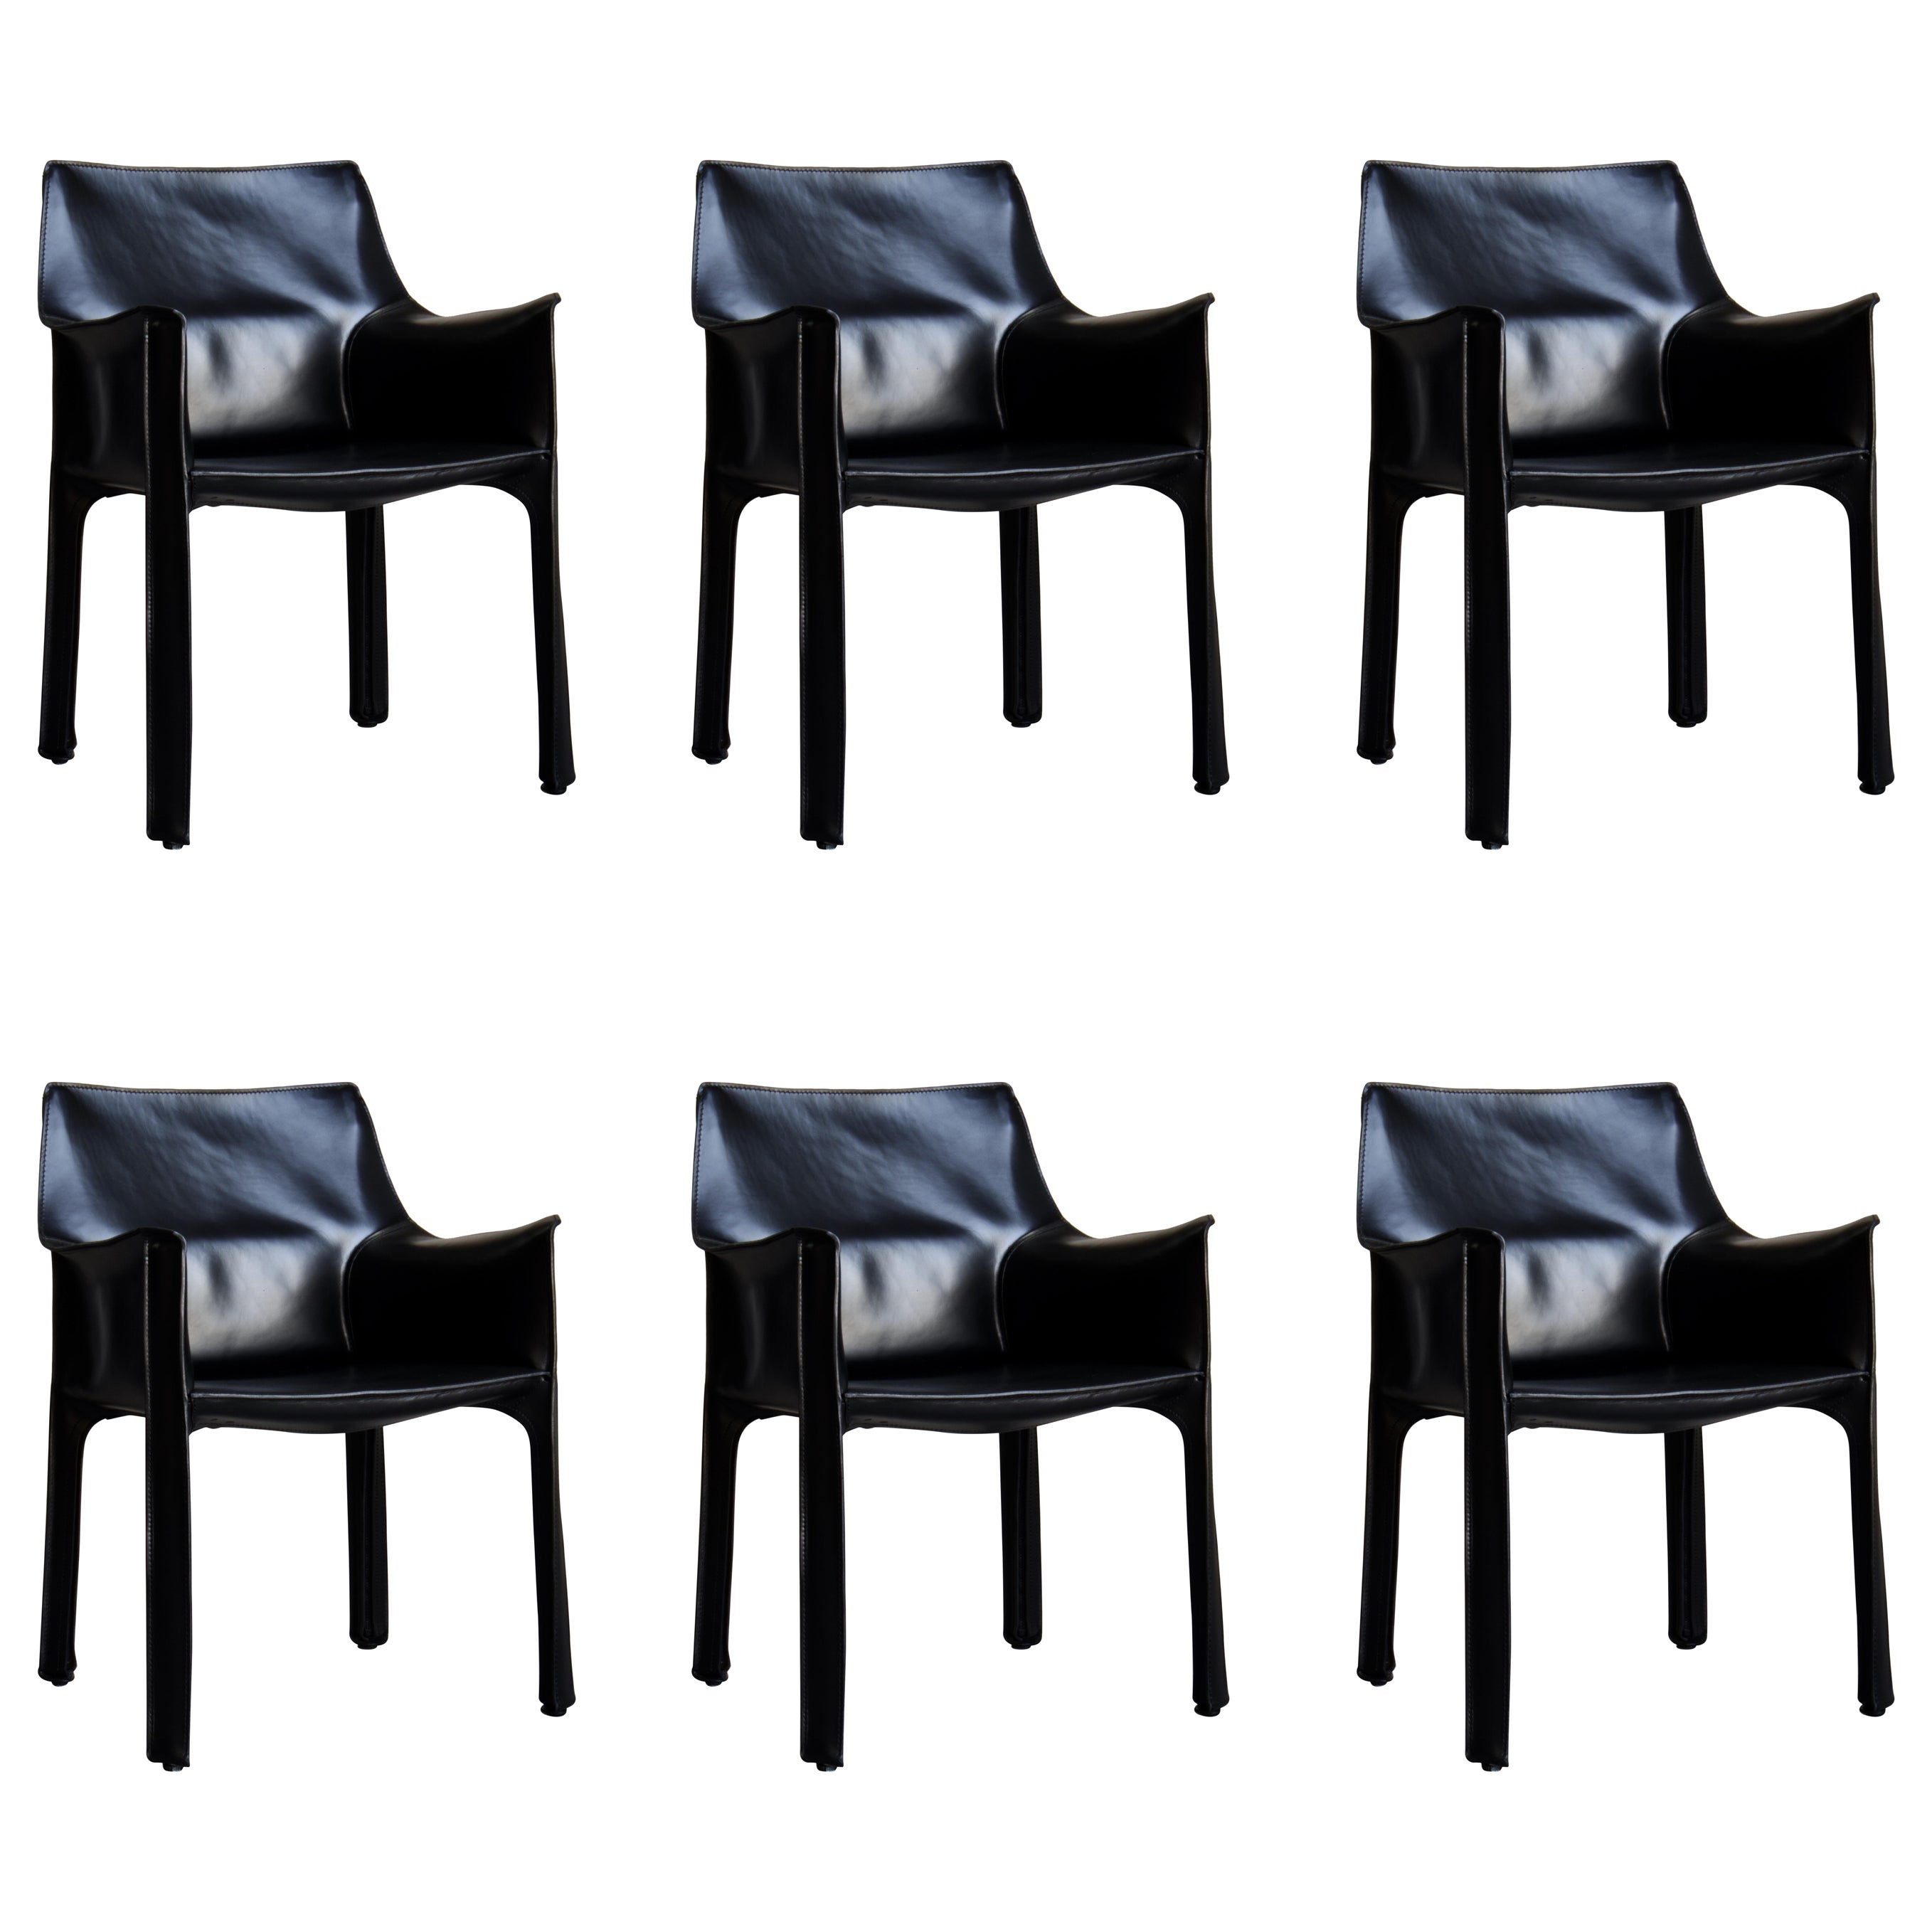 6 Mario Bellini CAB 413 Armchairs in Black Leather for Cassina, 1980s Italy For Sale